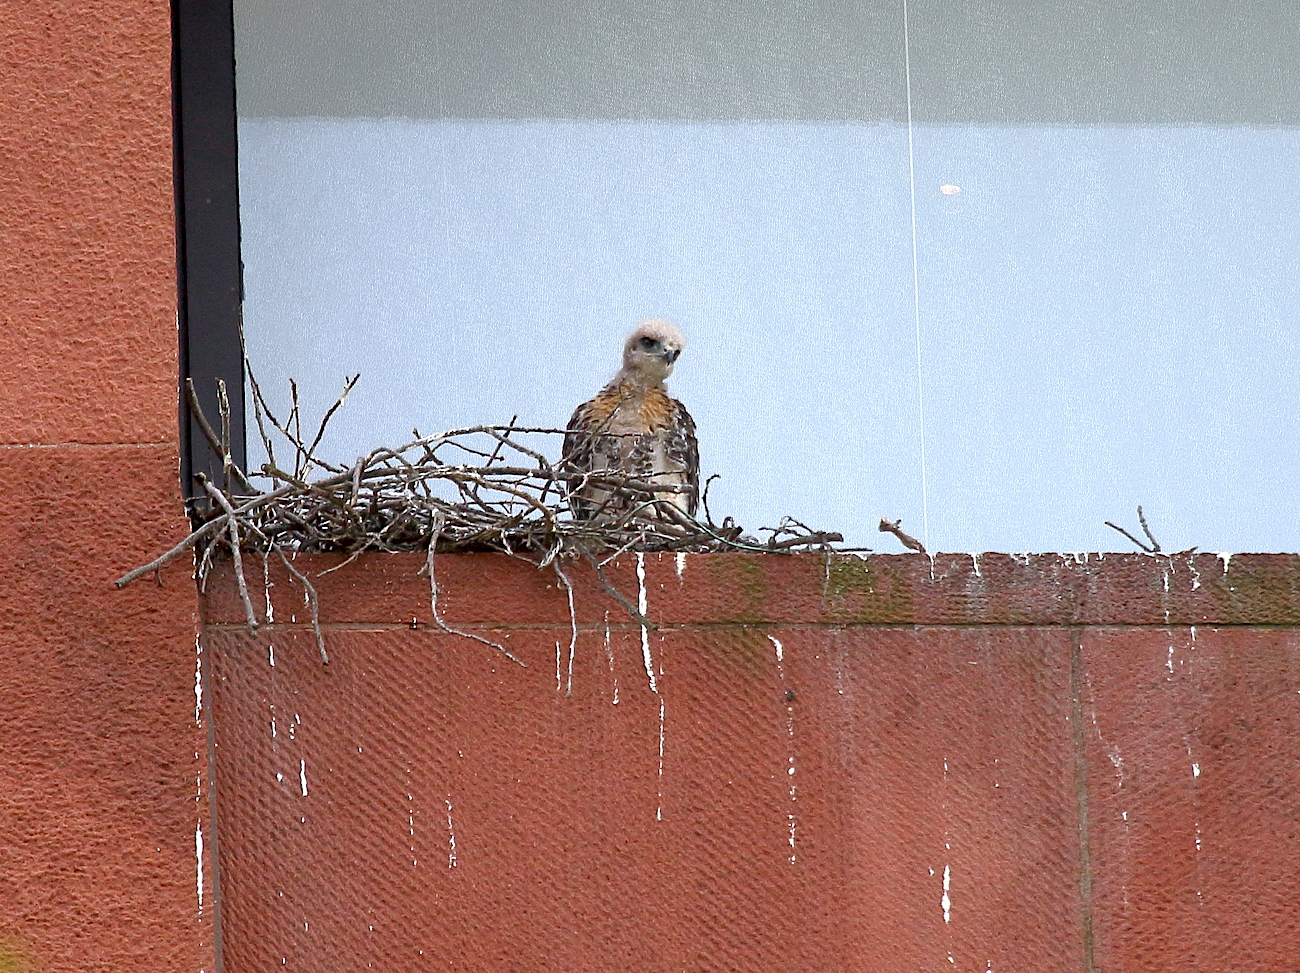 Hawk baby standing and watching the world